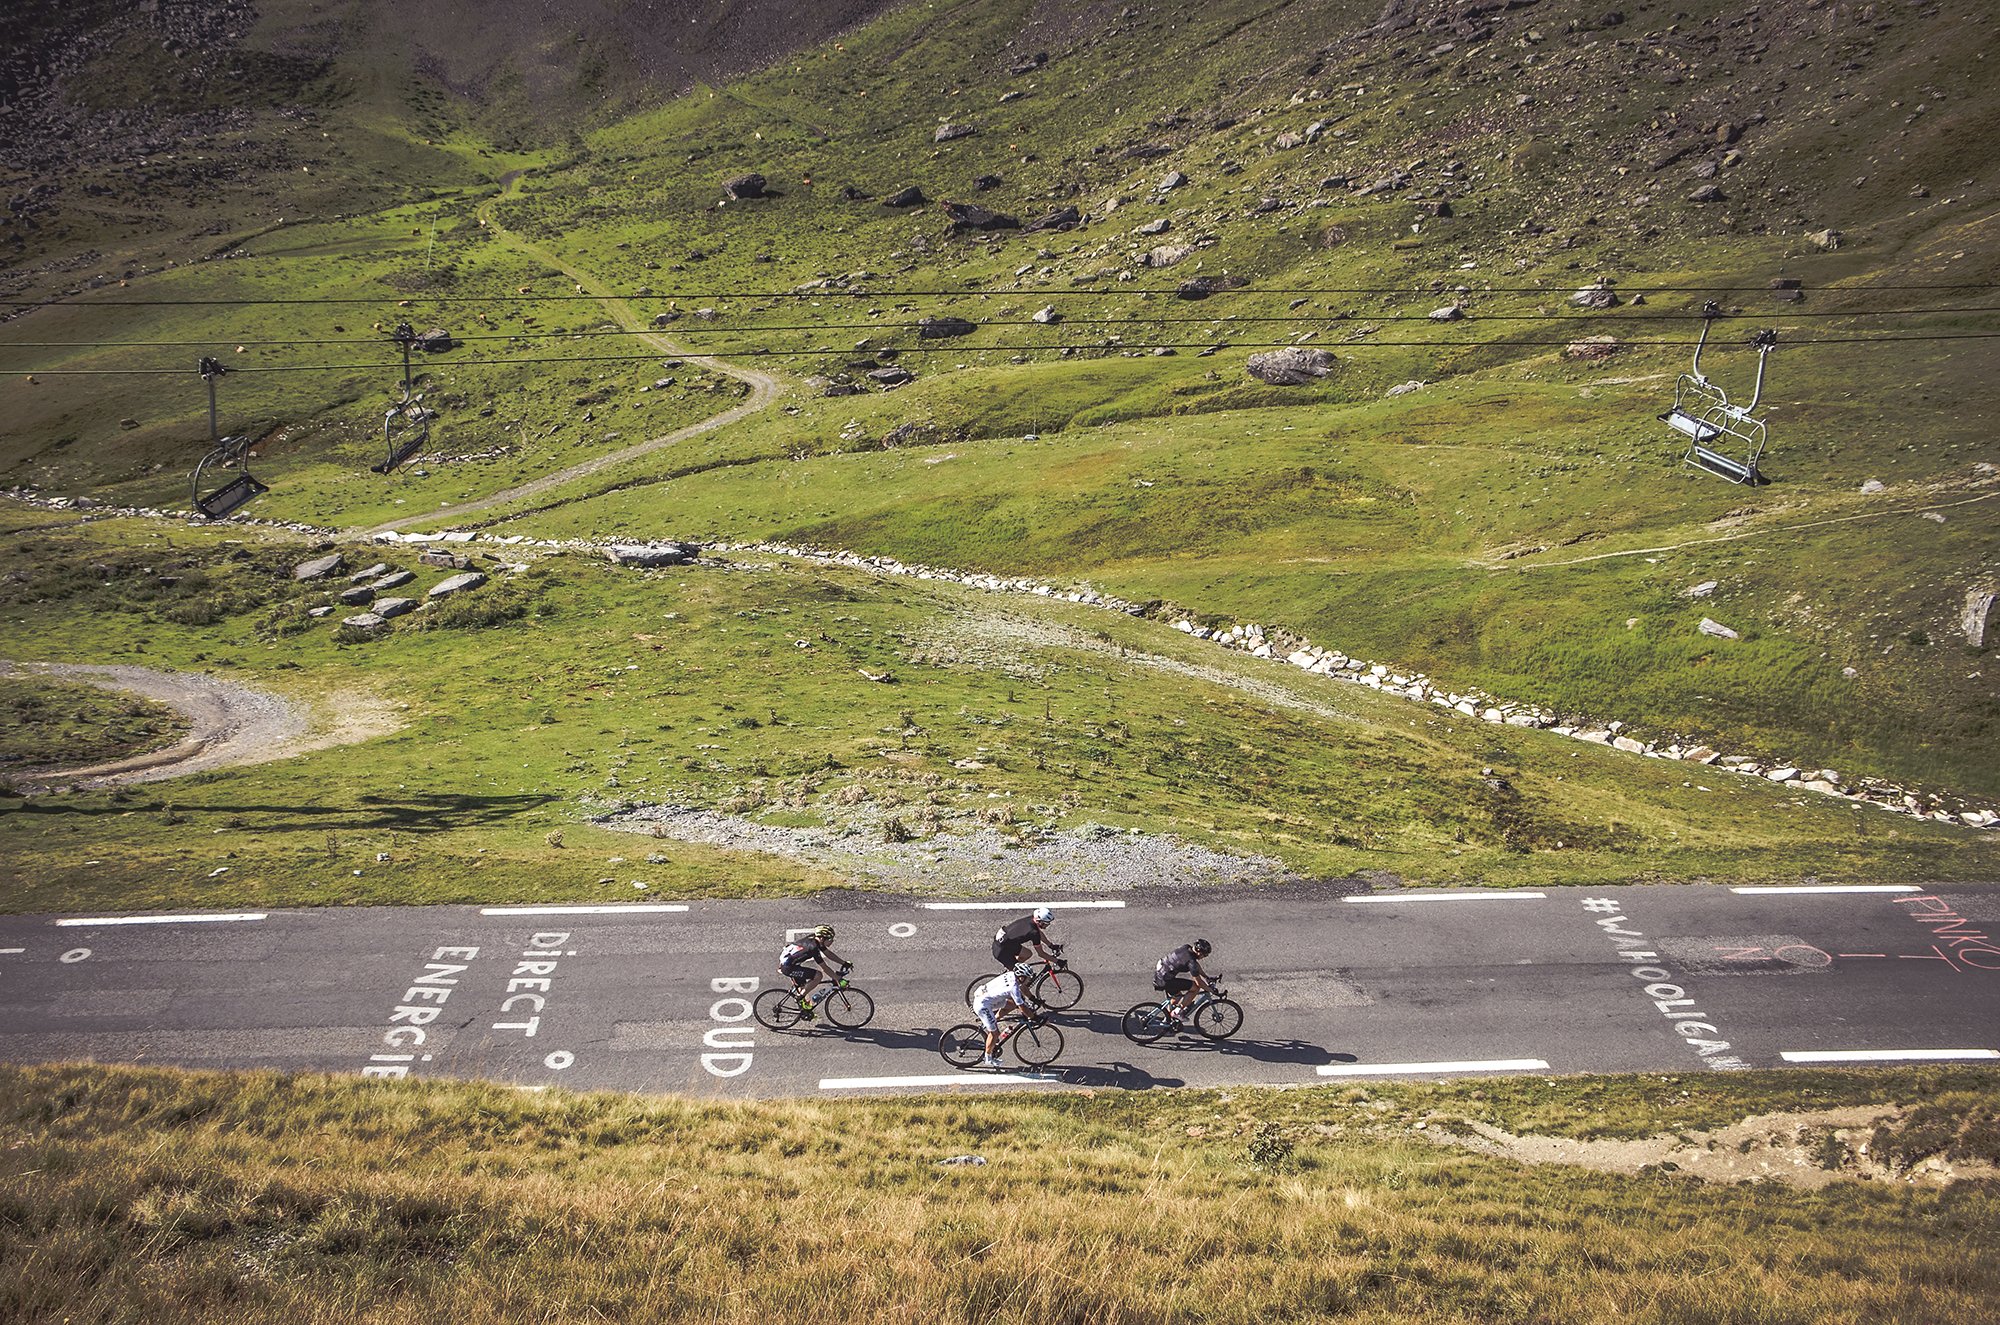 The Tourmalet is one of the top bucket list climbs